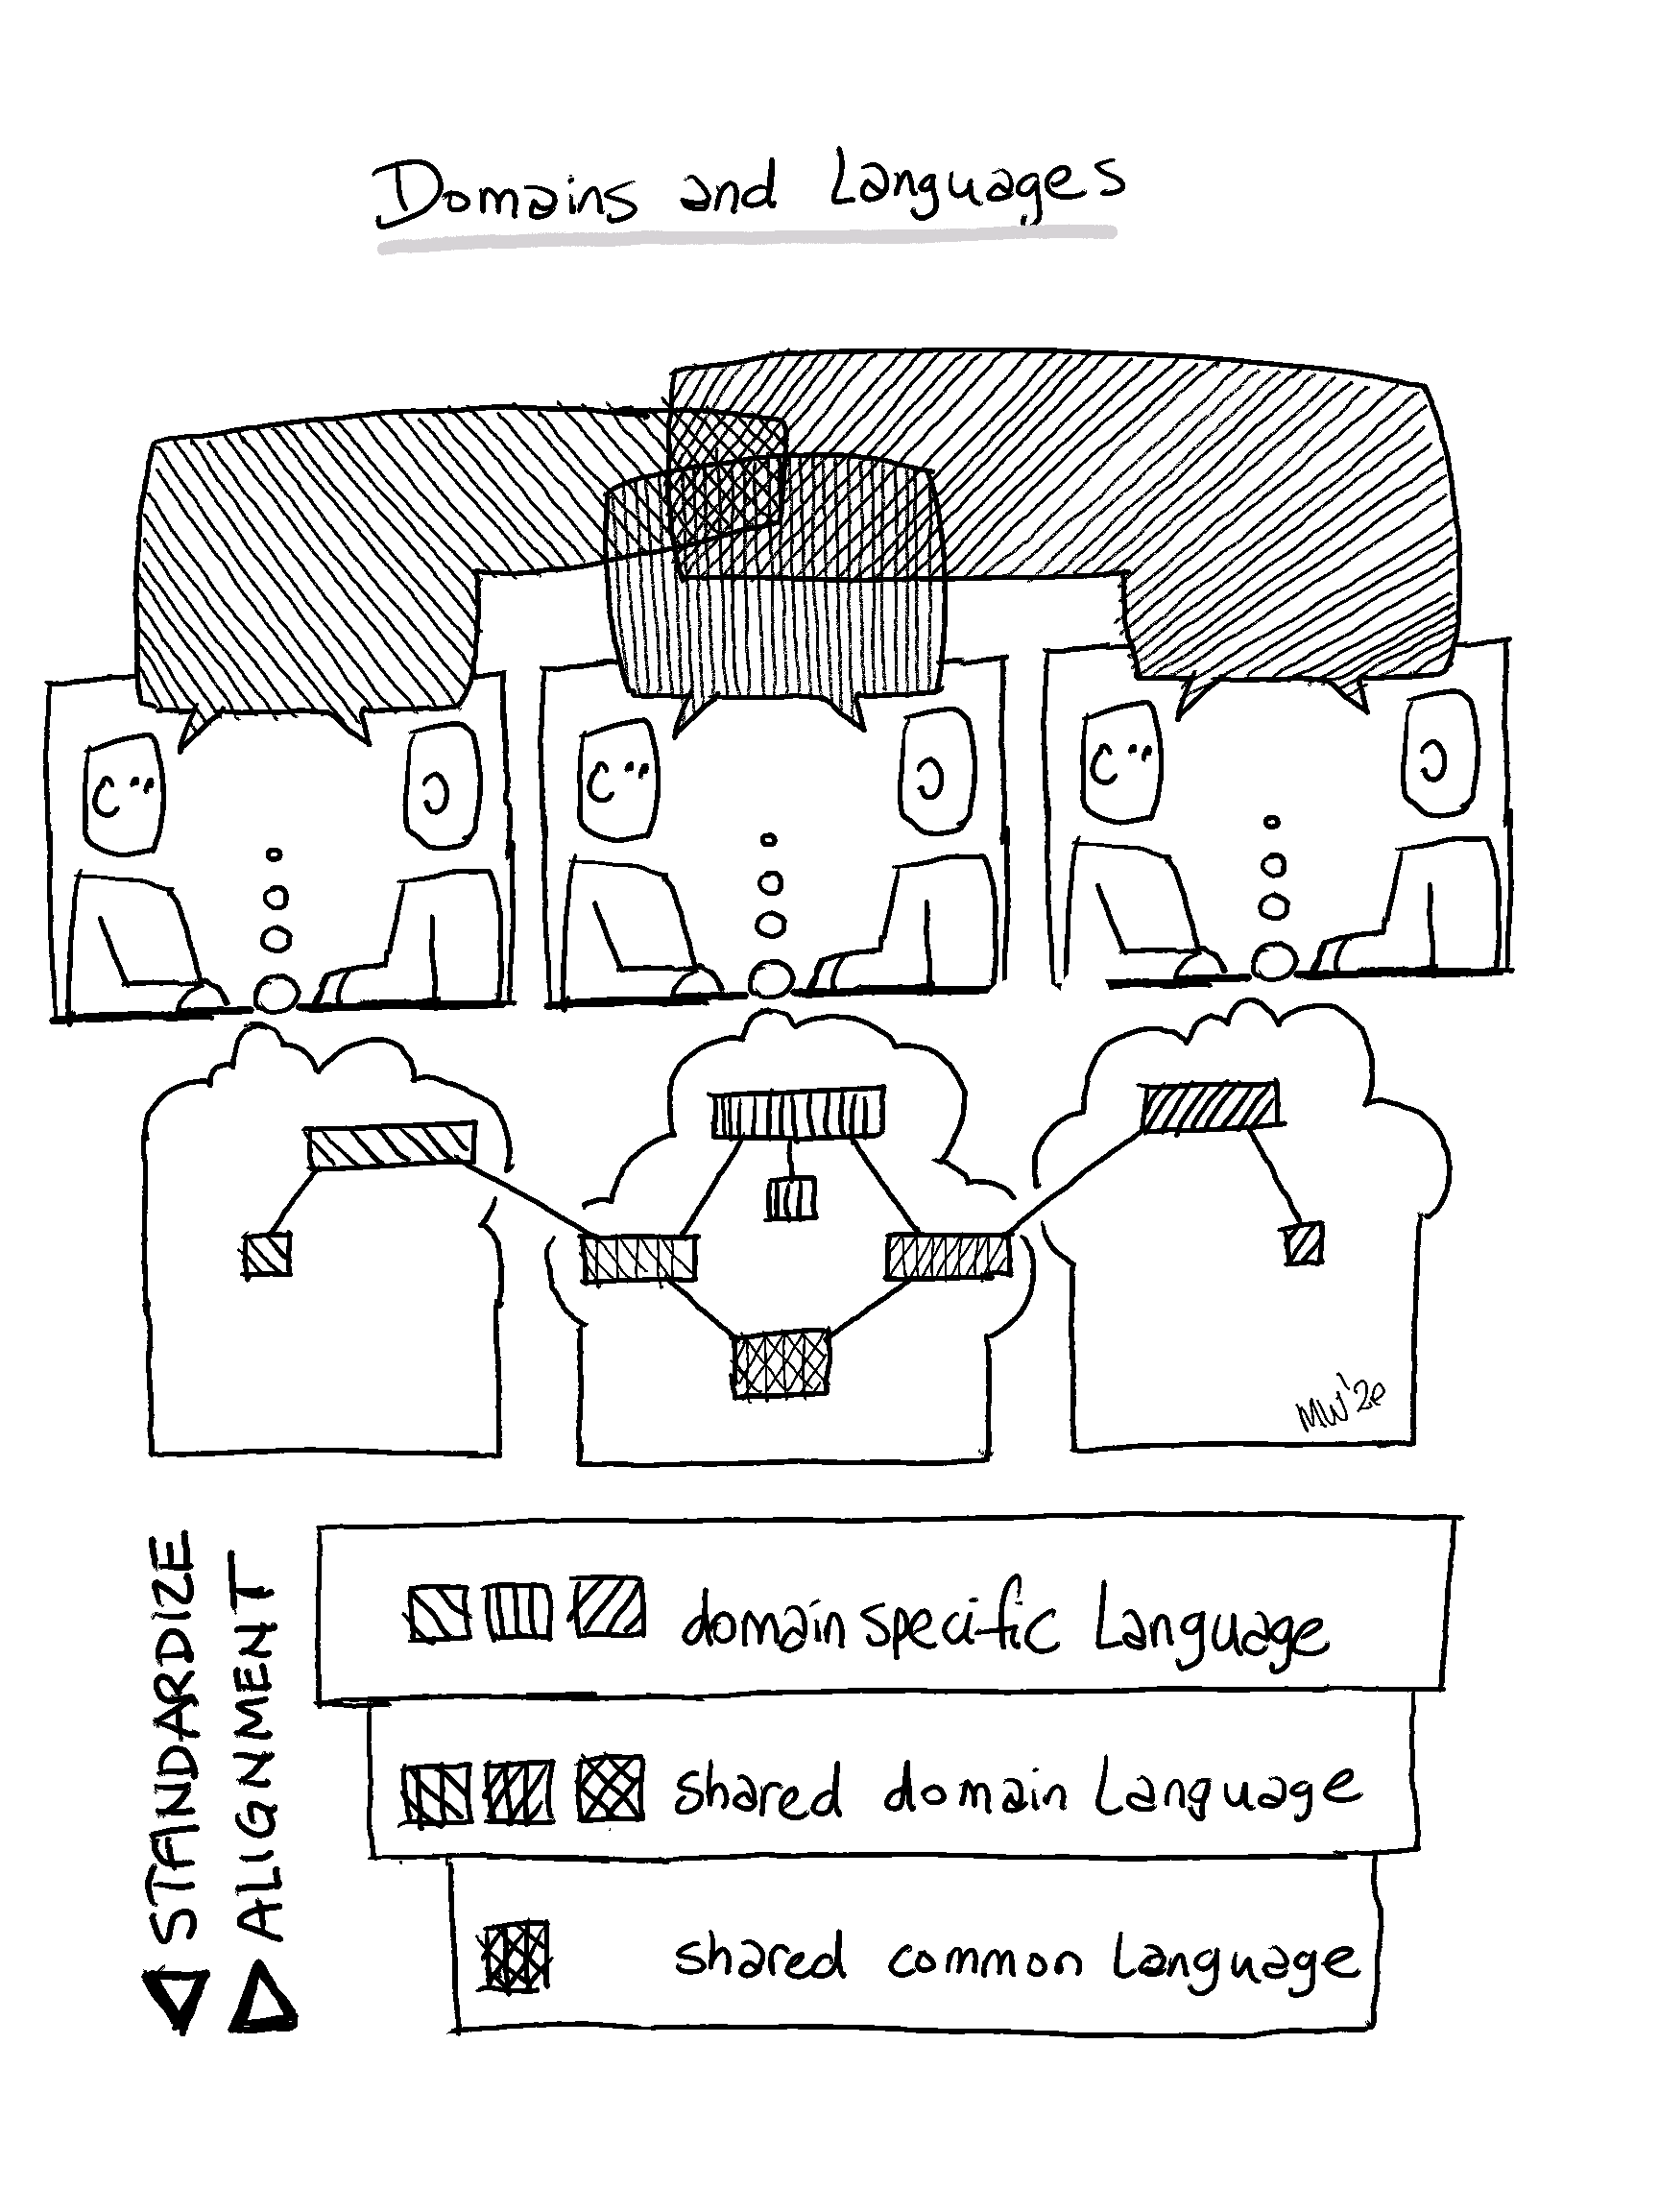 domains and languages